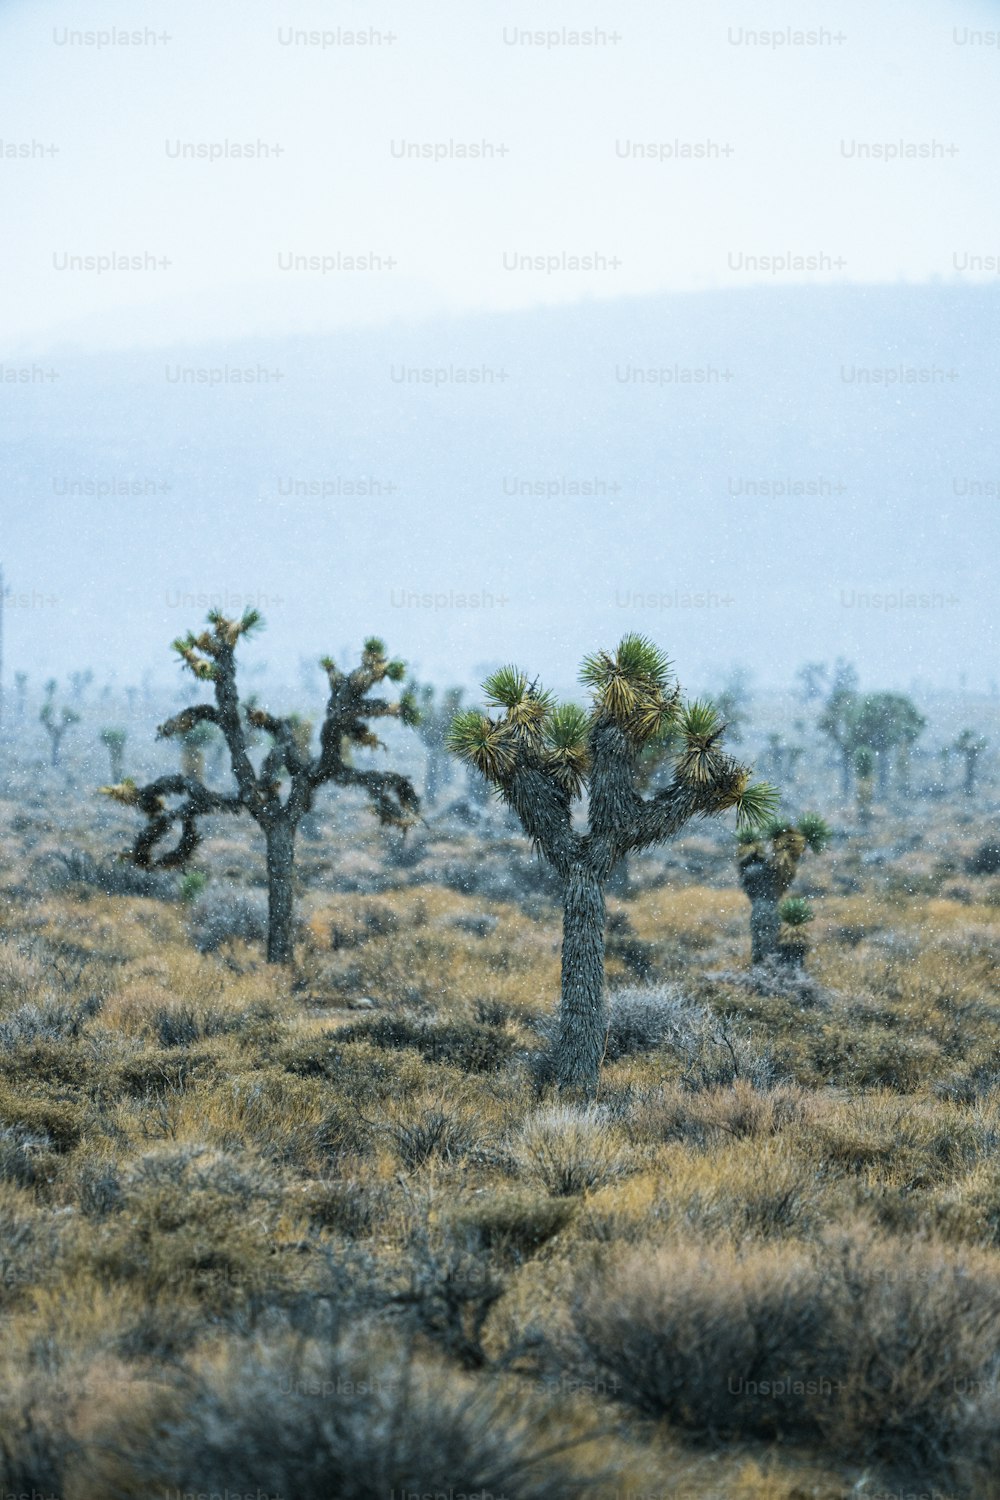 a group of joshua trees in the desert